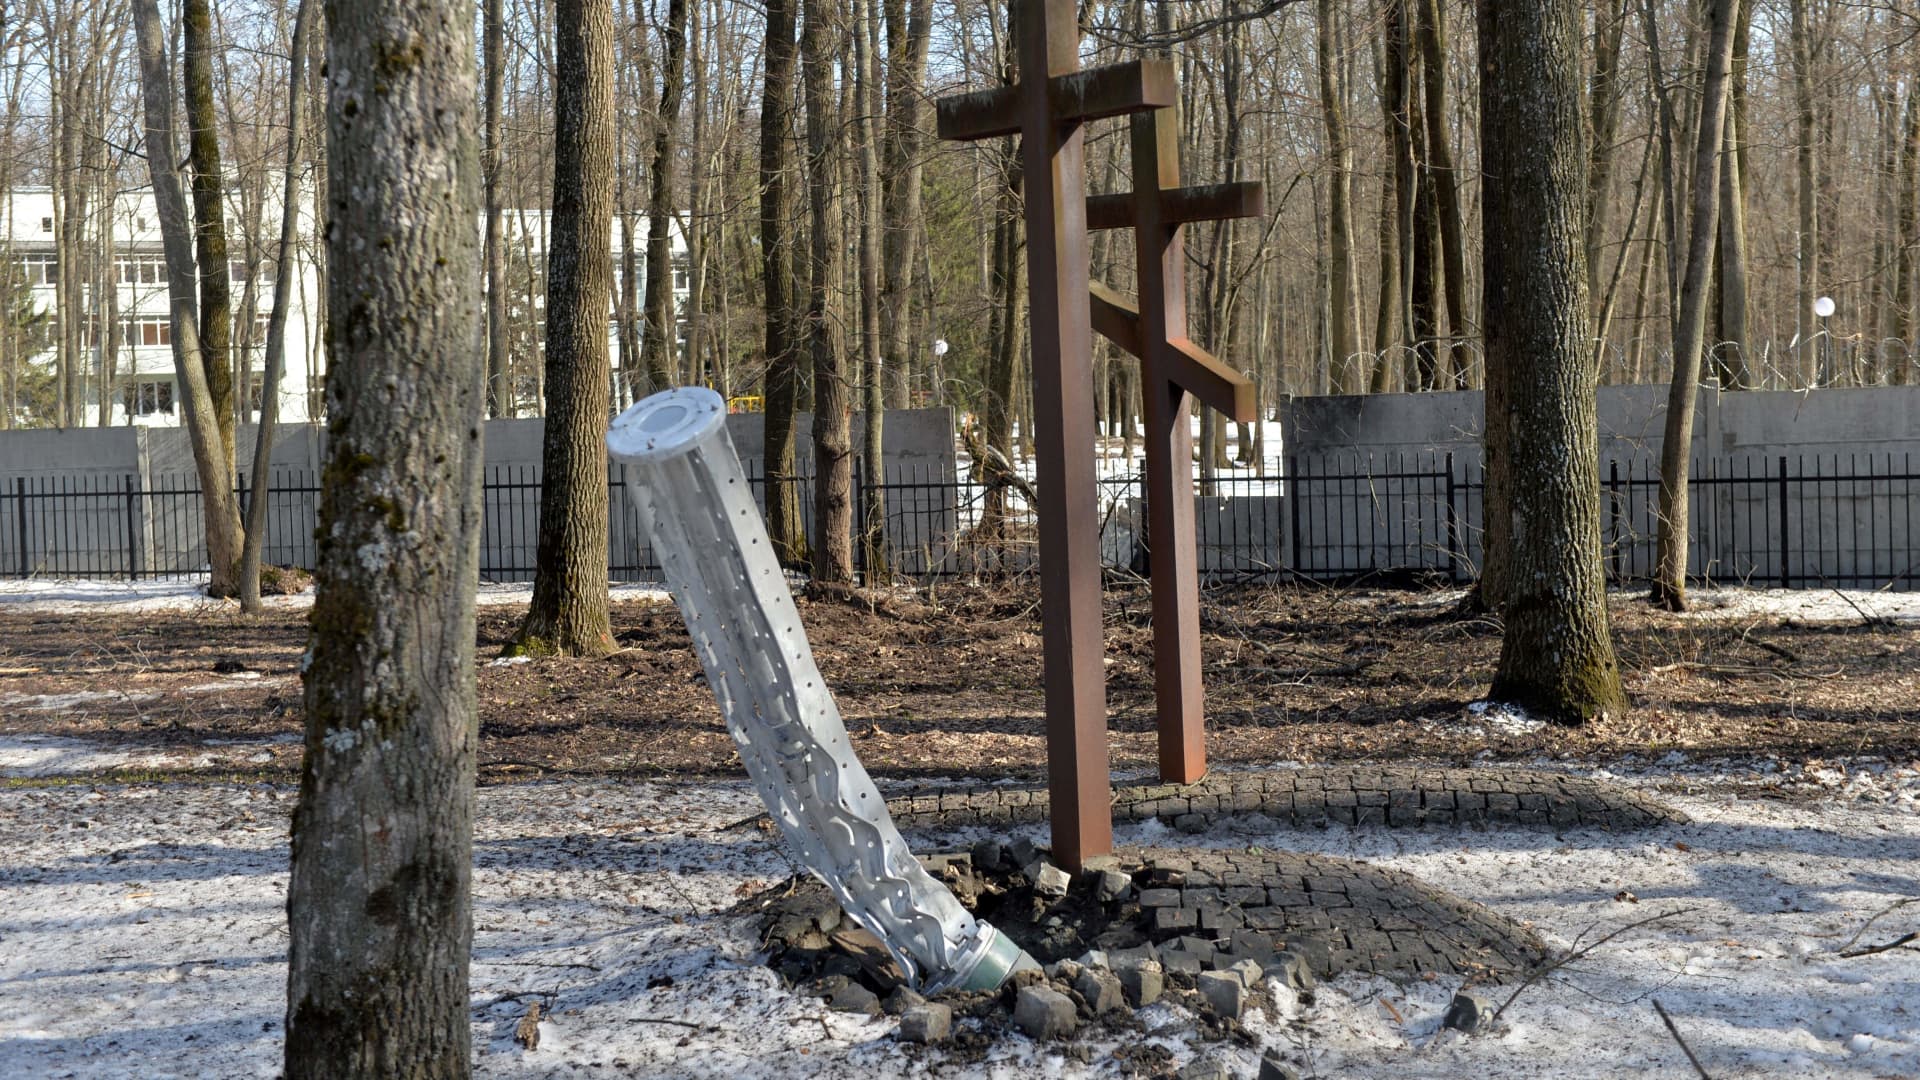 The internal components of a 300mm rocket which appears to contained cluster bombs launched from a BM-30 Smerch multiple rocket launcher are embedded in the ground next to graves after shelling near the Memorial to the Victims of Totalitarianism in a forest on the outskirts of Kharkiv on March 23, 2022.